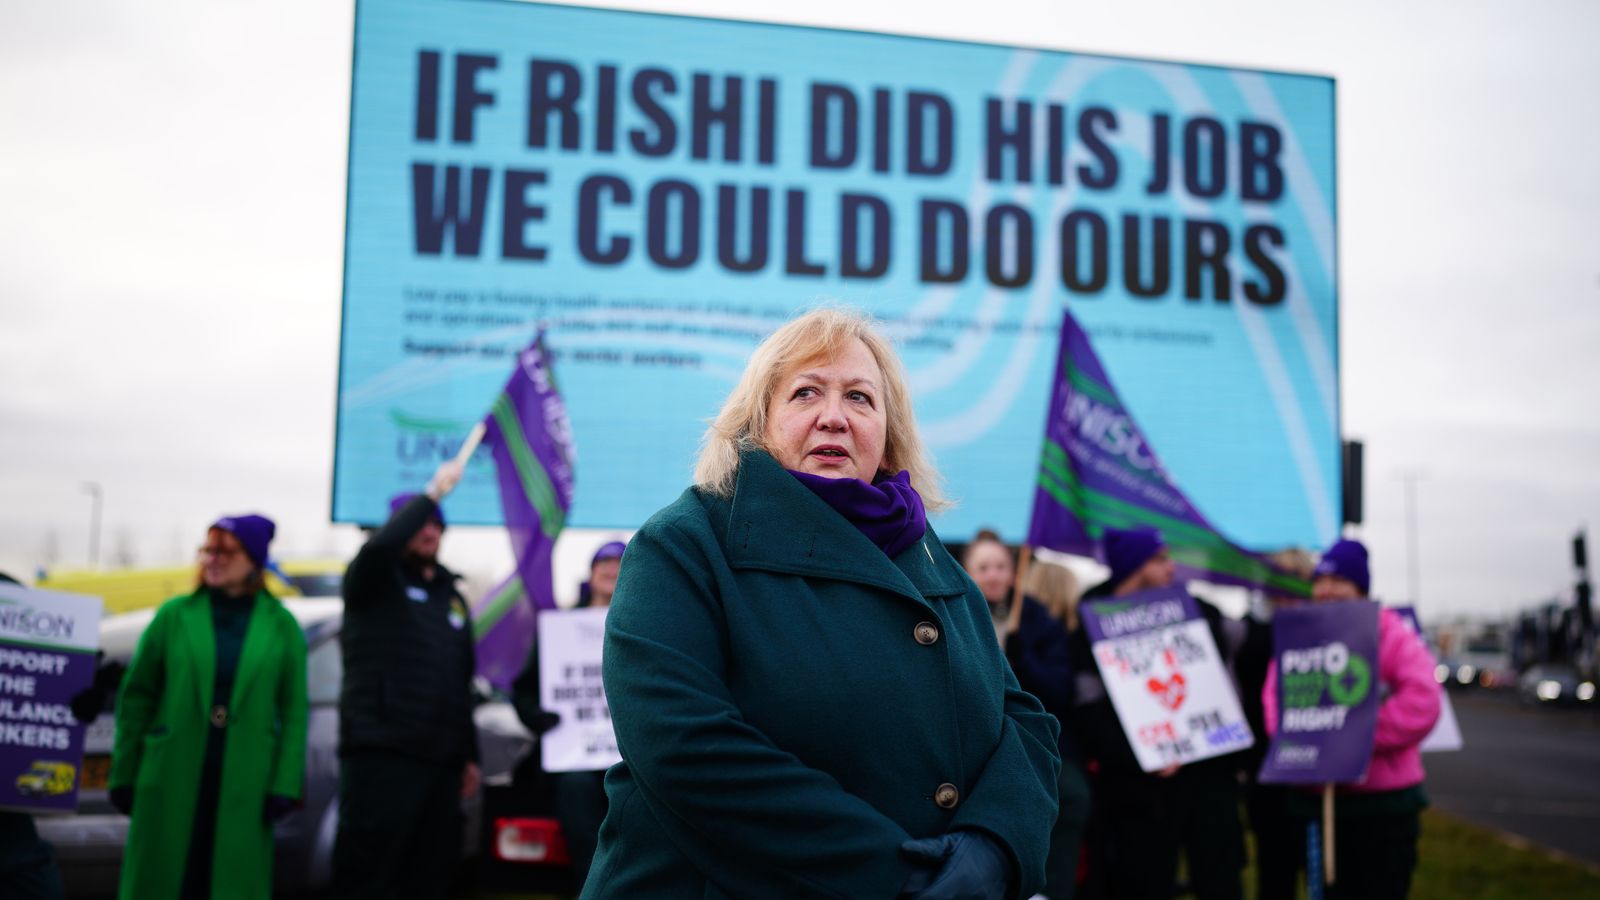 Members of Unison have voted to accept NHS pay offer